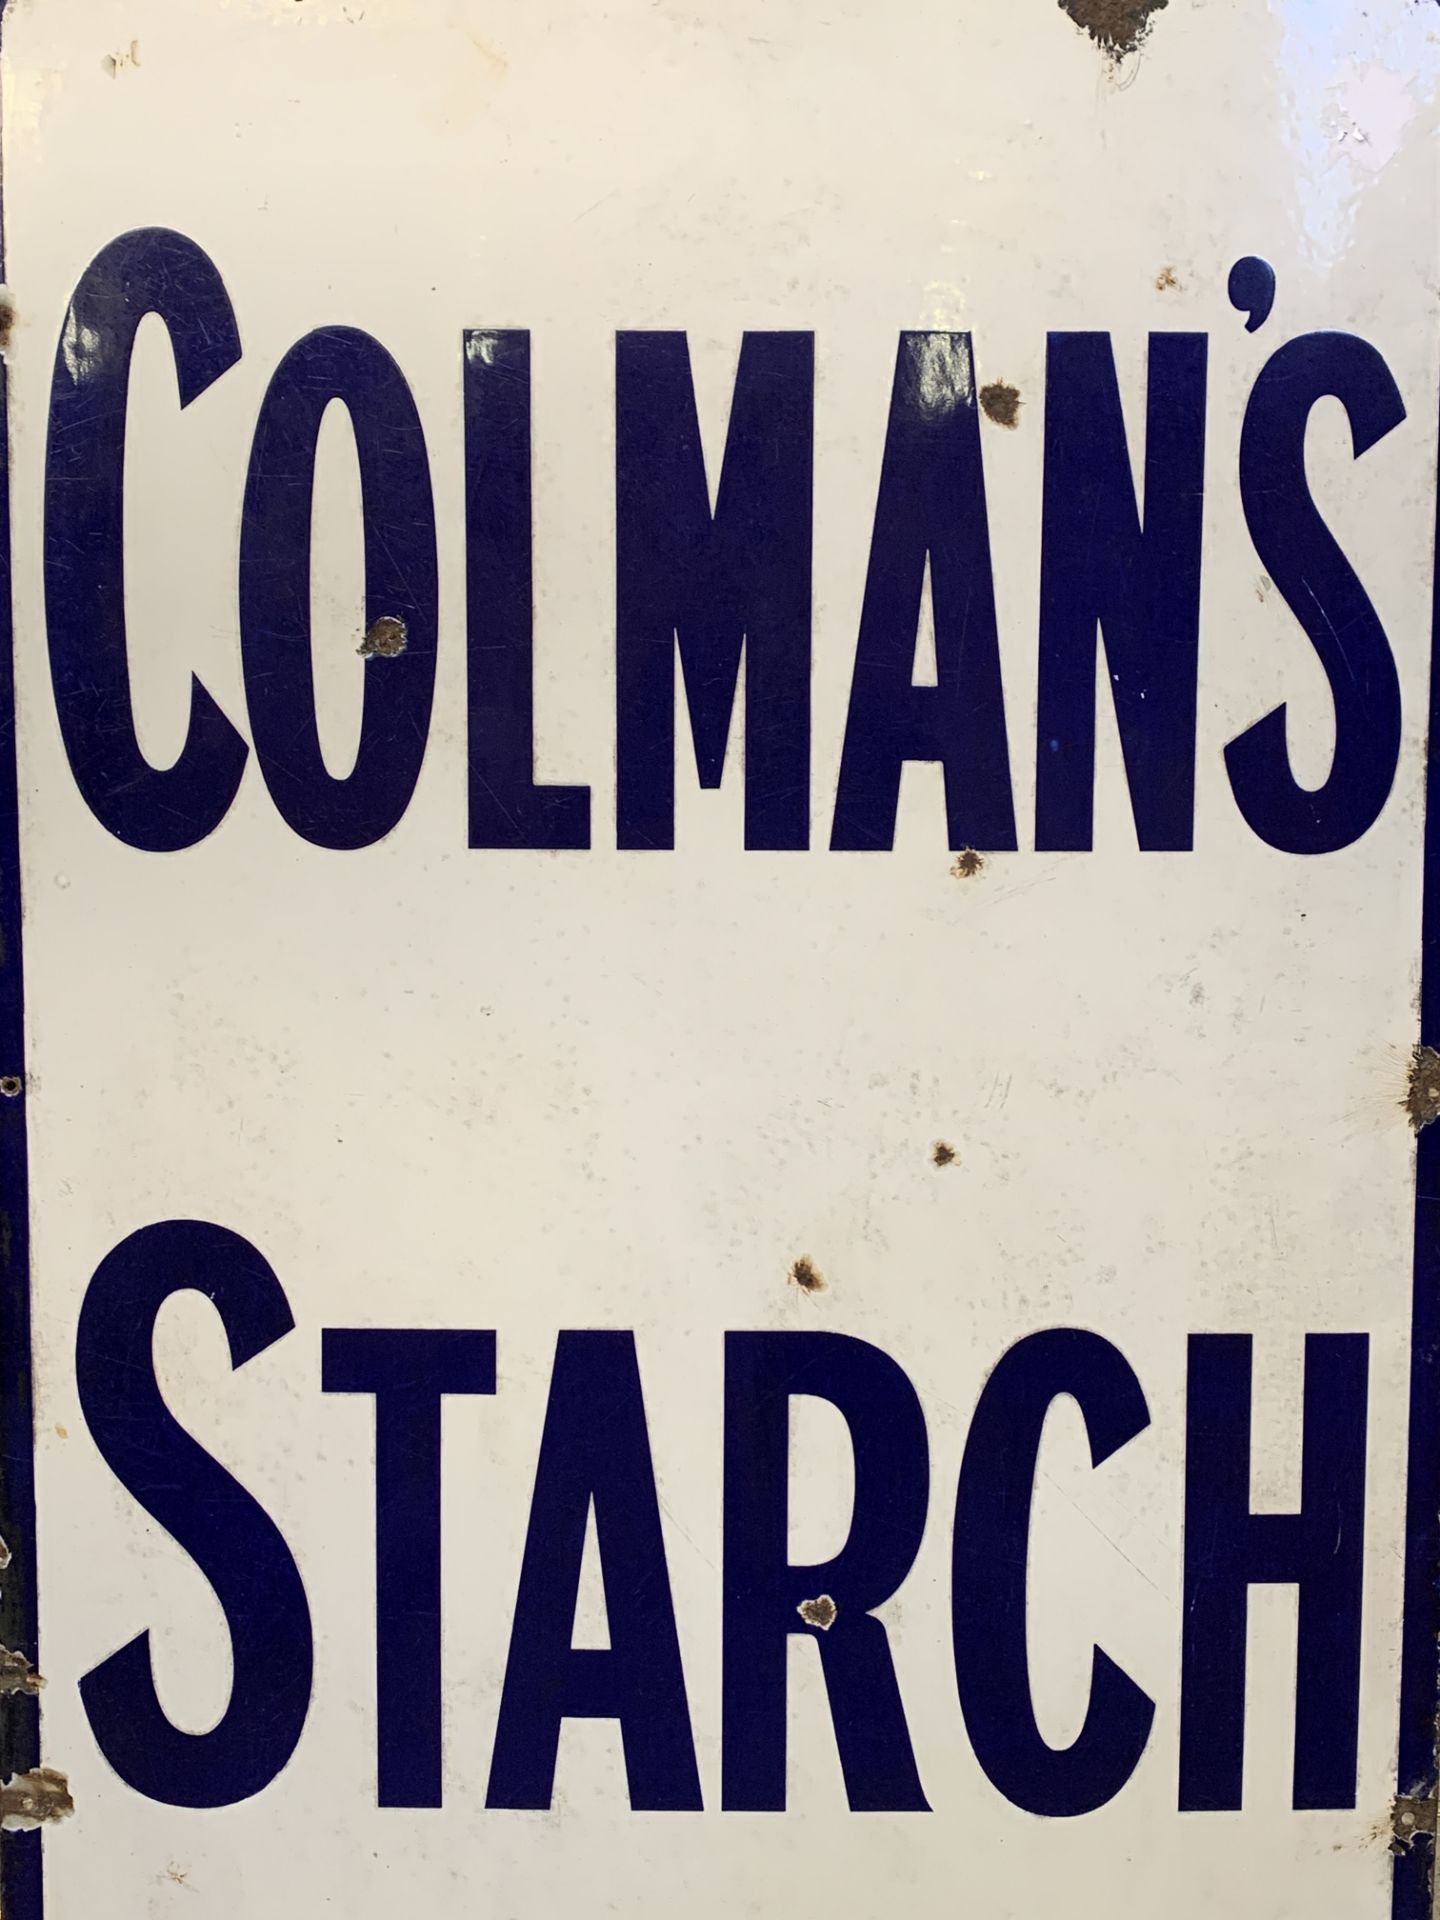 Blue and white enamel advertising sign "Colman's Starch" - Image 3 of 3